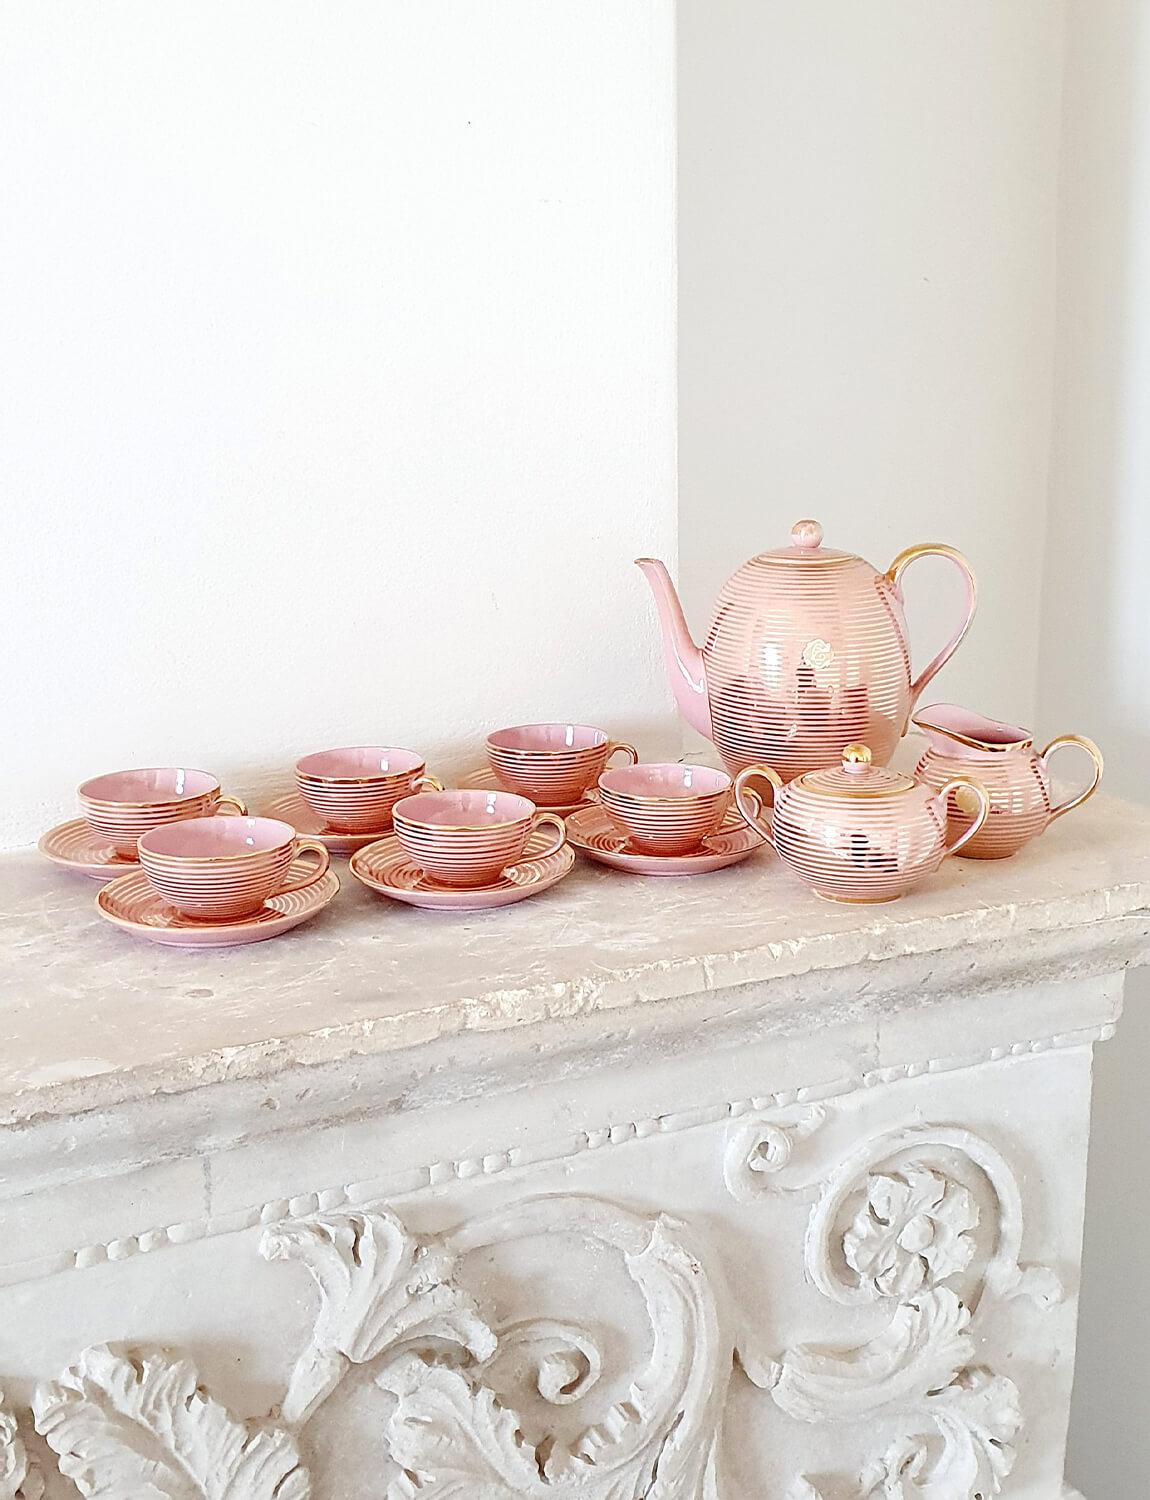 Extraordinary 1930s Richard Ginori Italian Coffee Service in baby pink with gold stripes. This fifteen piece set was found in Tuscany and was a wedding present which had never been opened and used by a couple in the 1940s. The wedding stickers are